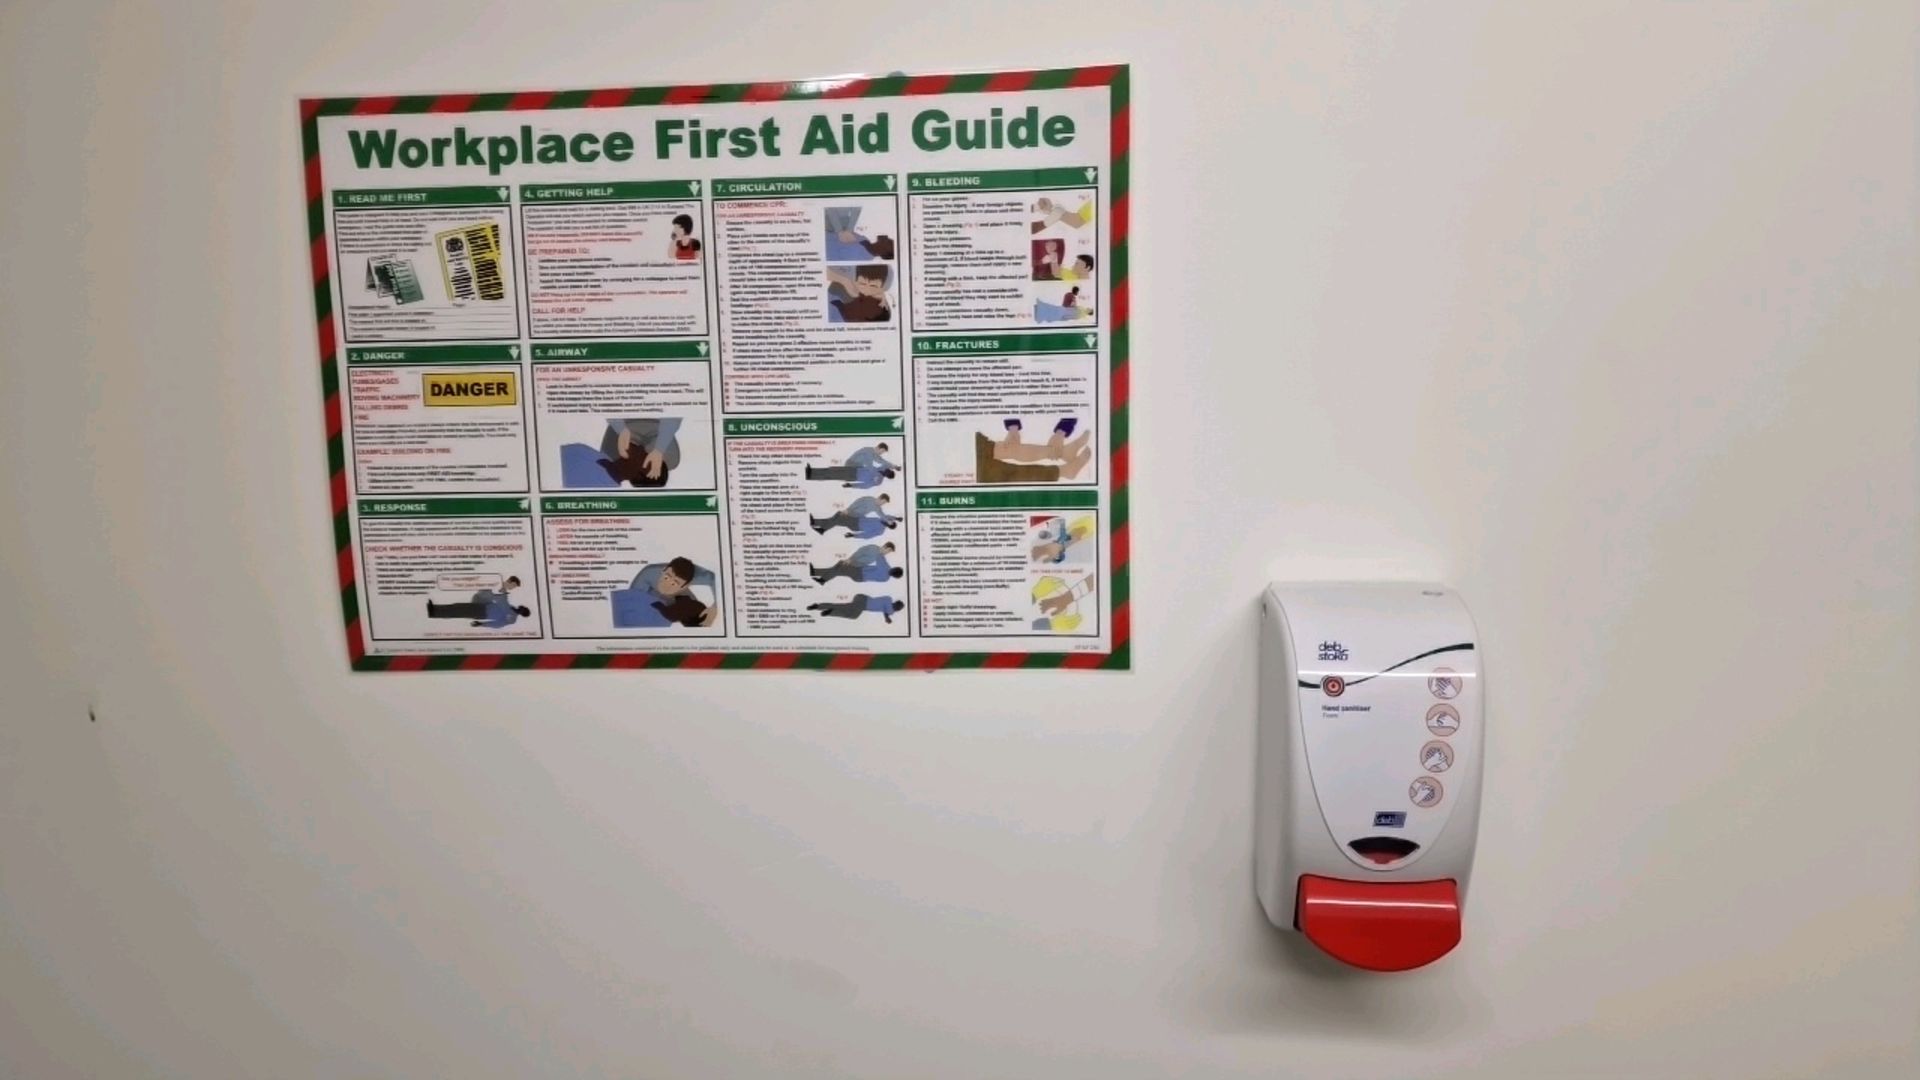 Contents of First Aid Room - Image 7 of 9